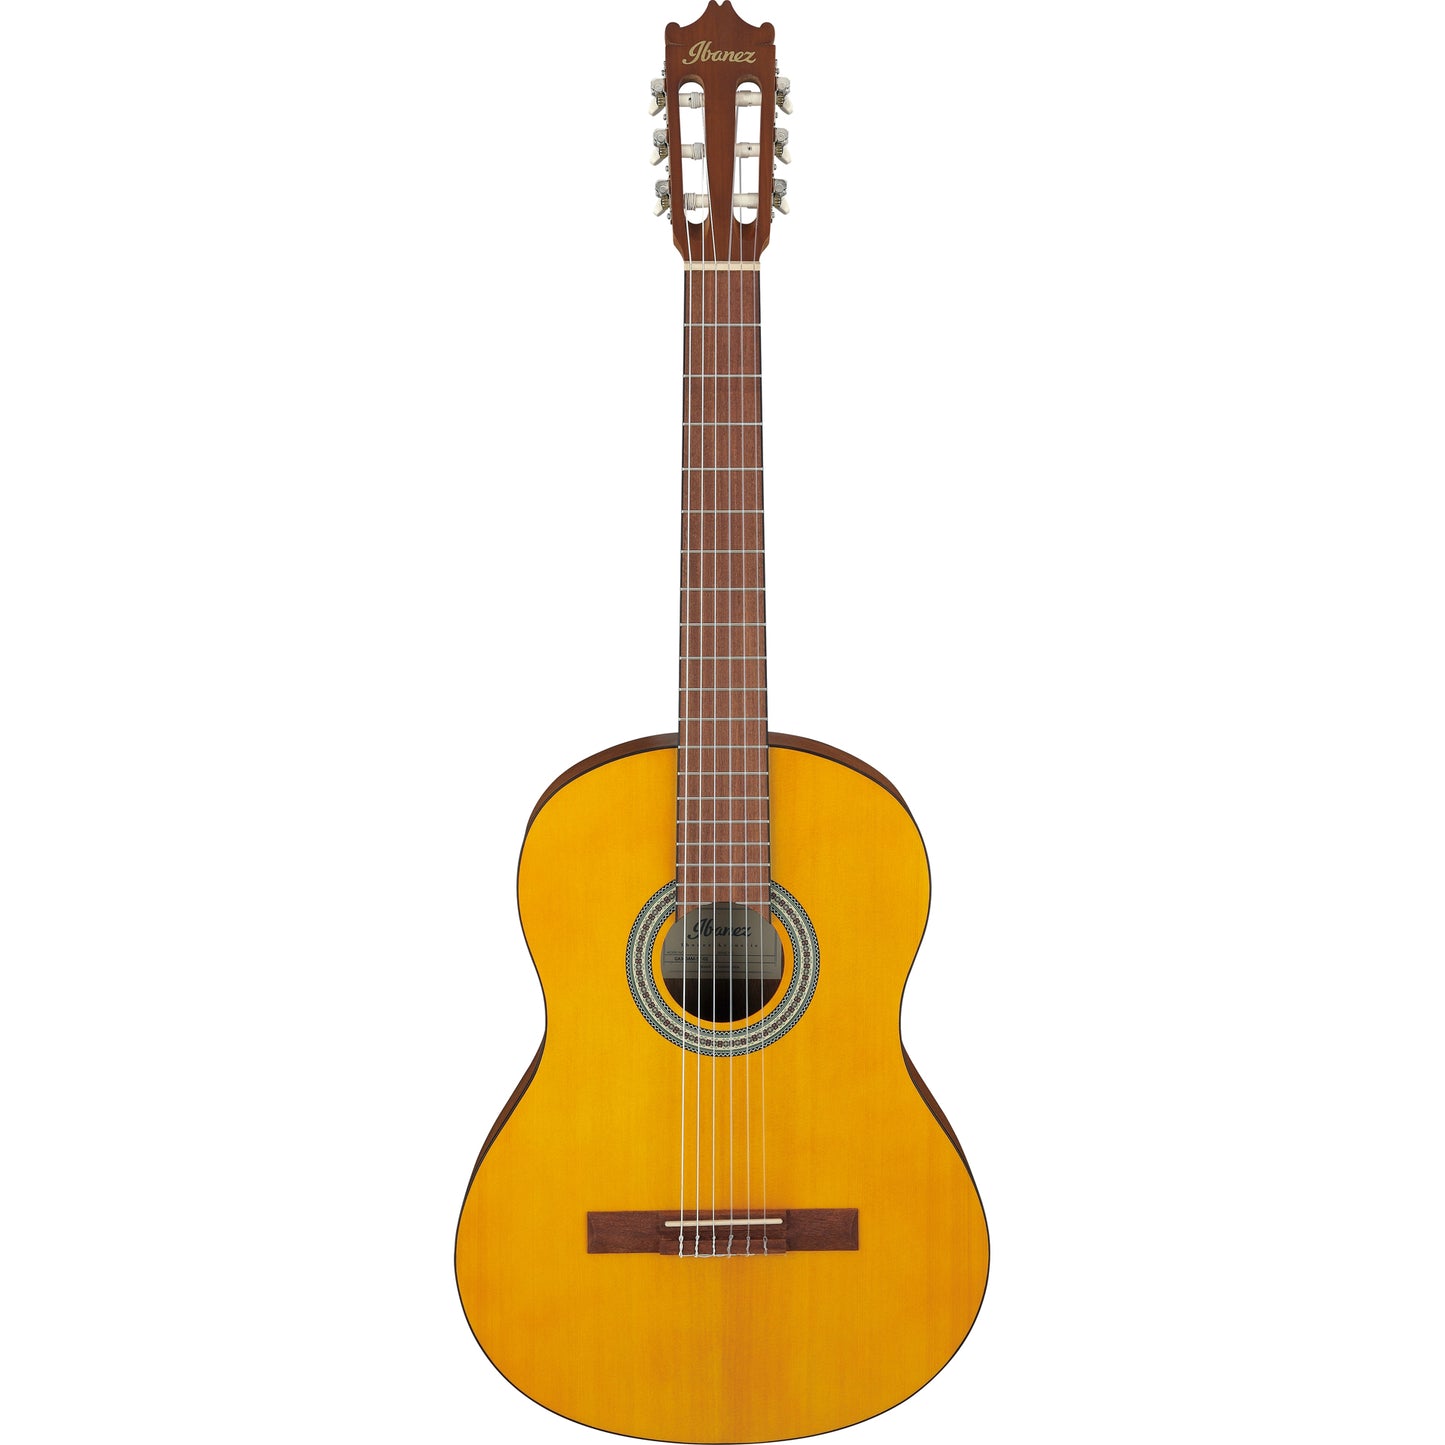 Ibanez GA3 6 String Classic Acoustic Guitar - Open Pore Amber